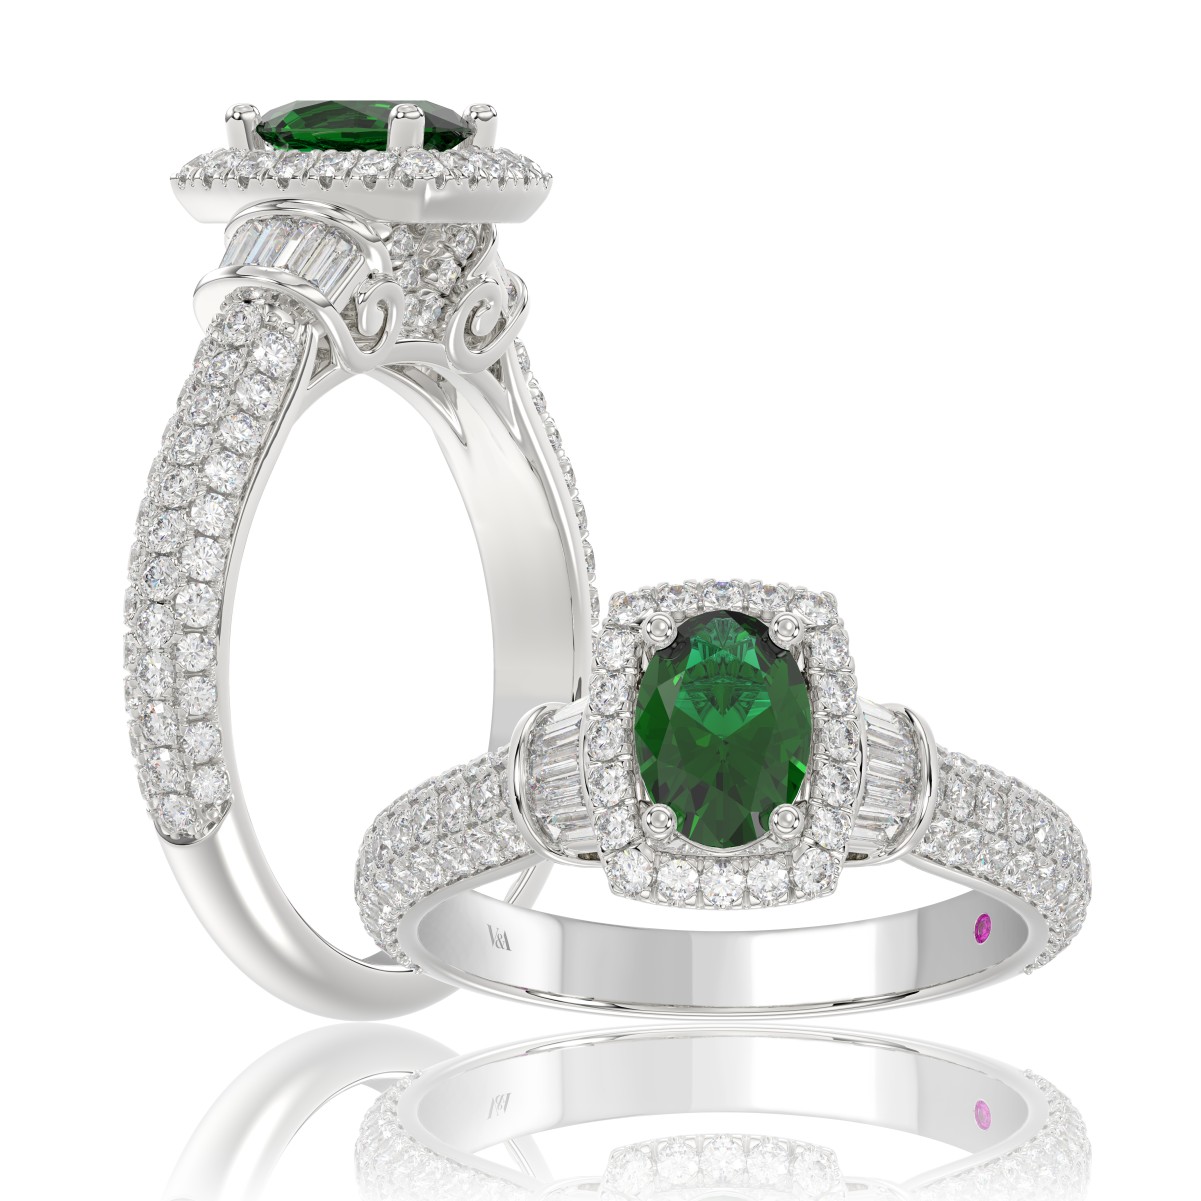 14K WHITE GOLD 1 1/2CT ROUND/BAGUETTE/OVAL DIAMOND LADIES FASHION RING(COLOR STONE OVAL GREEN EMERALD DIAMOND 3/4CT)